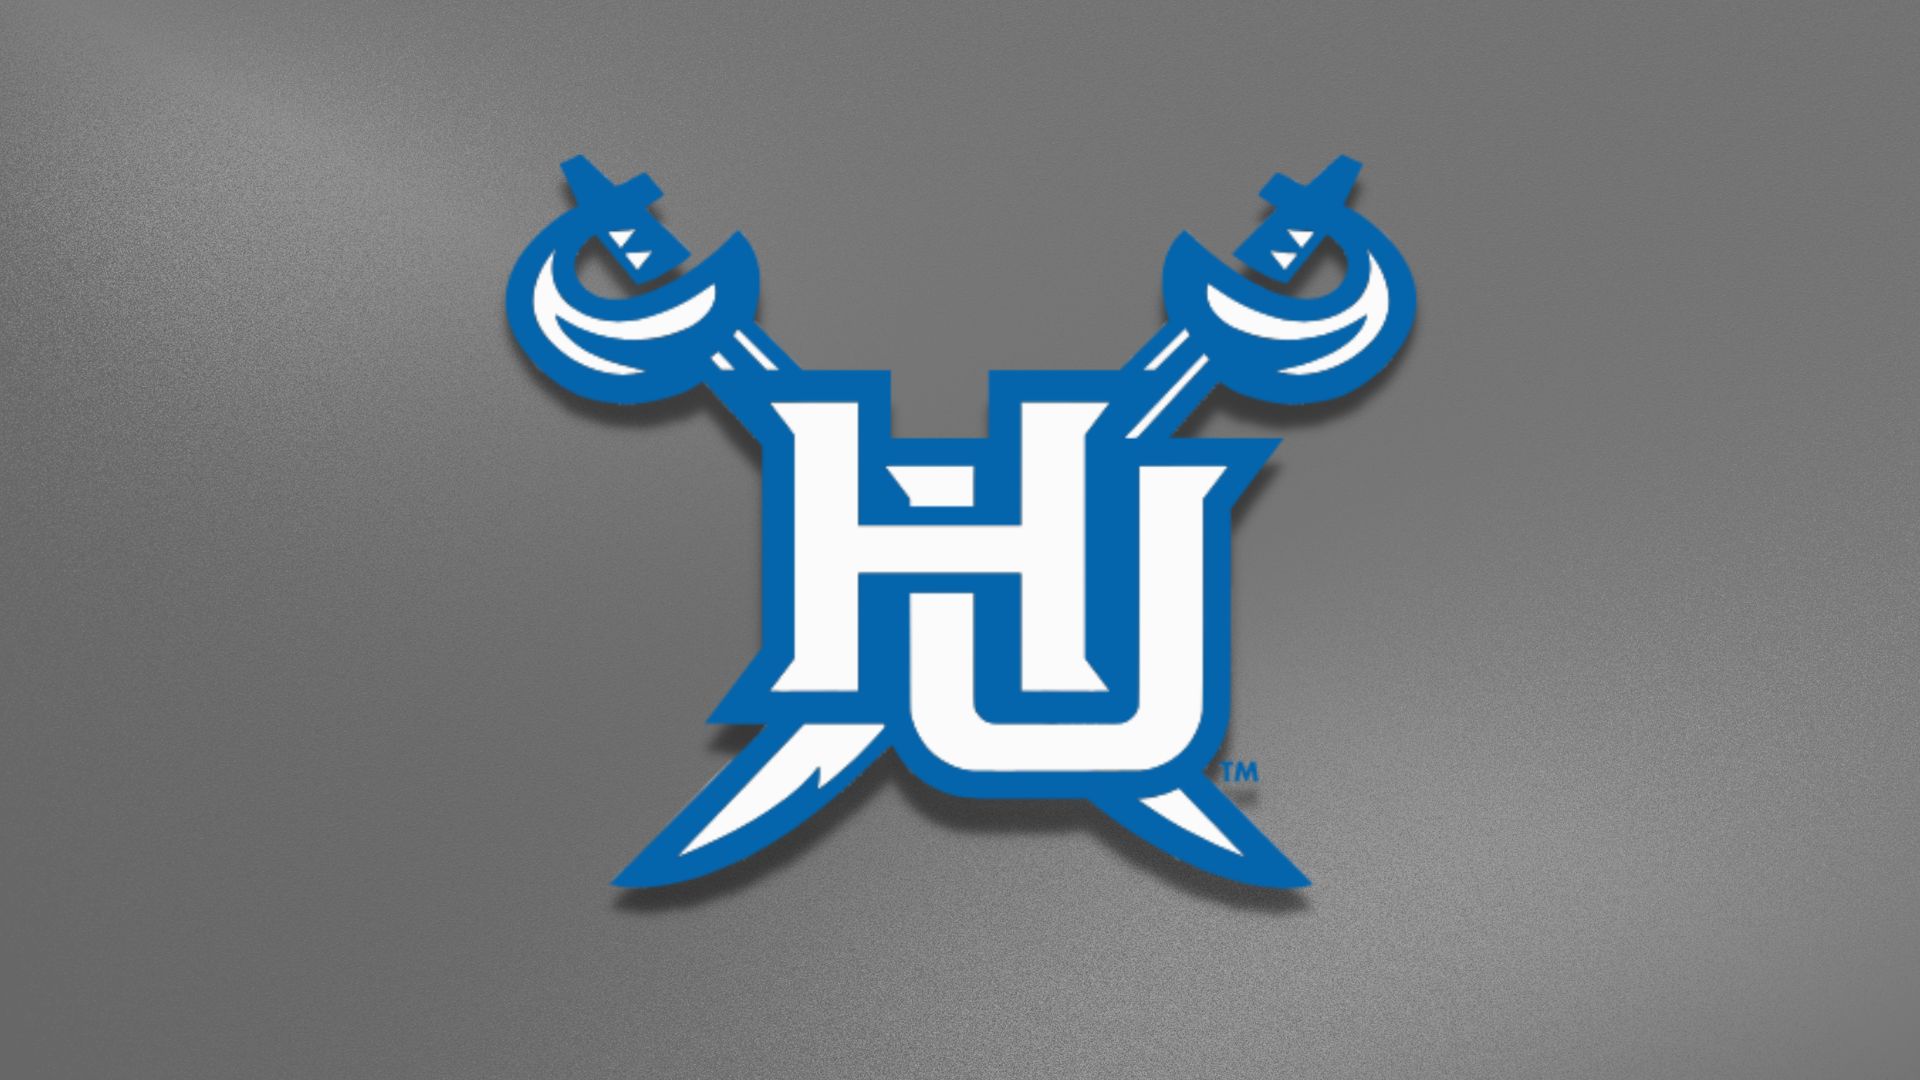 Ivan Thomas appointed Head Basketball Coach at Hampton University – Coach’s Background Revealed